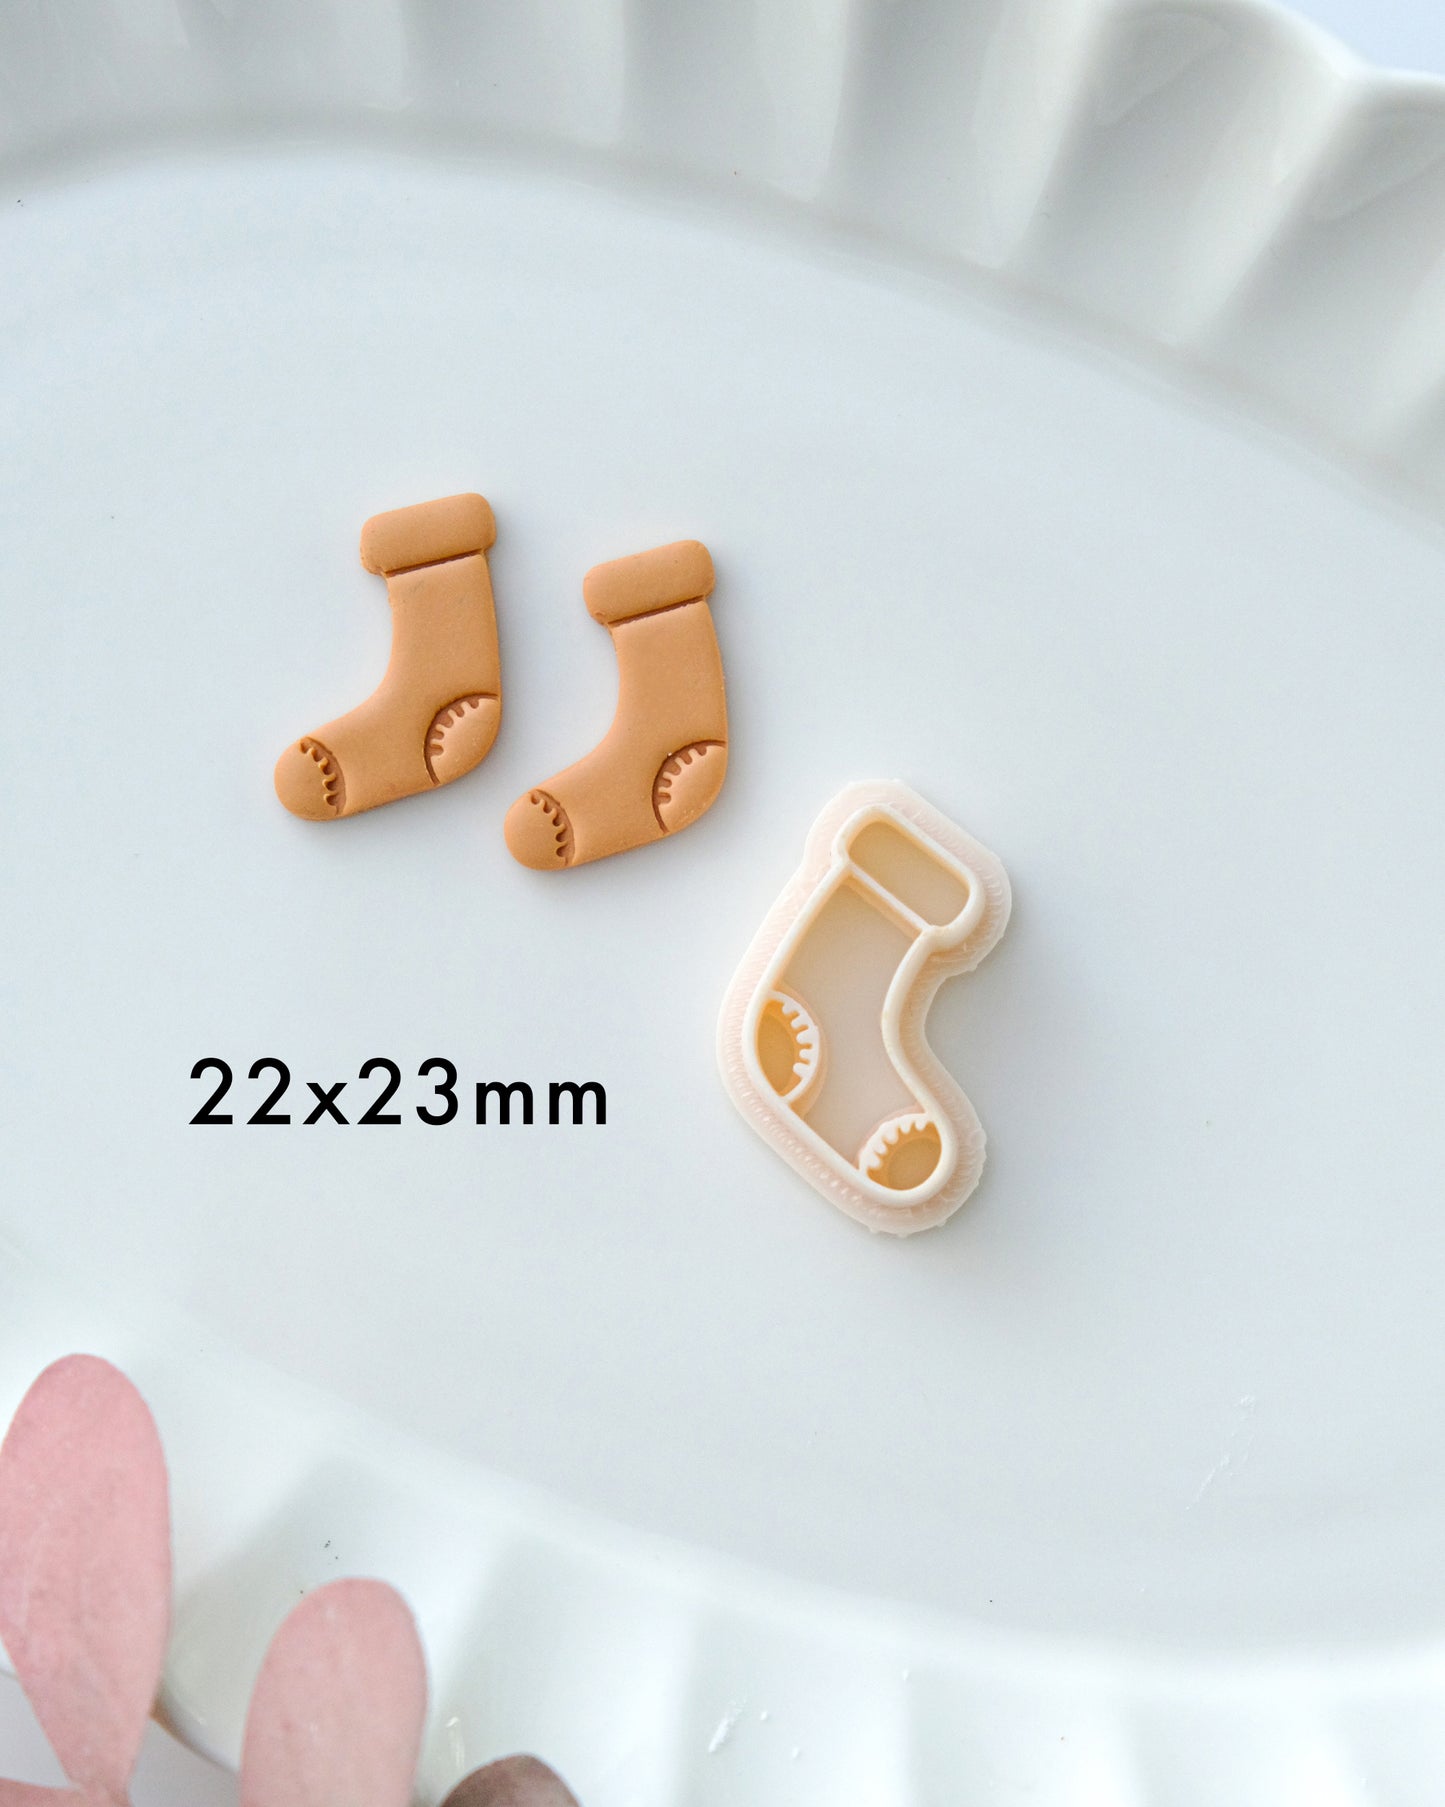 4 Shapes Christmas Clay Cutters Set